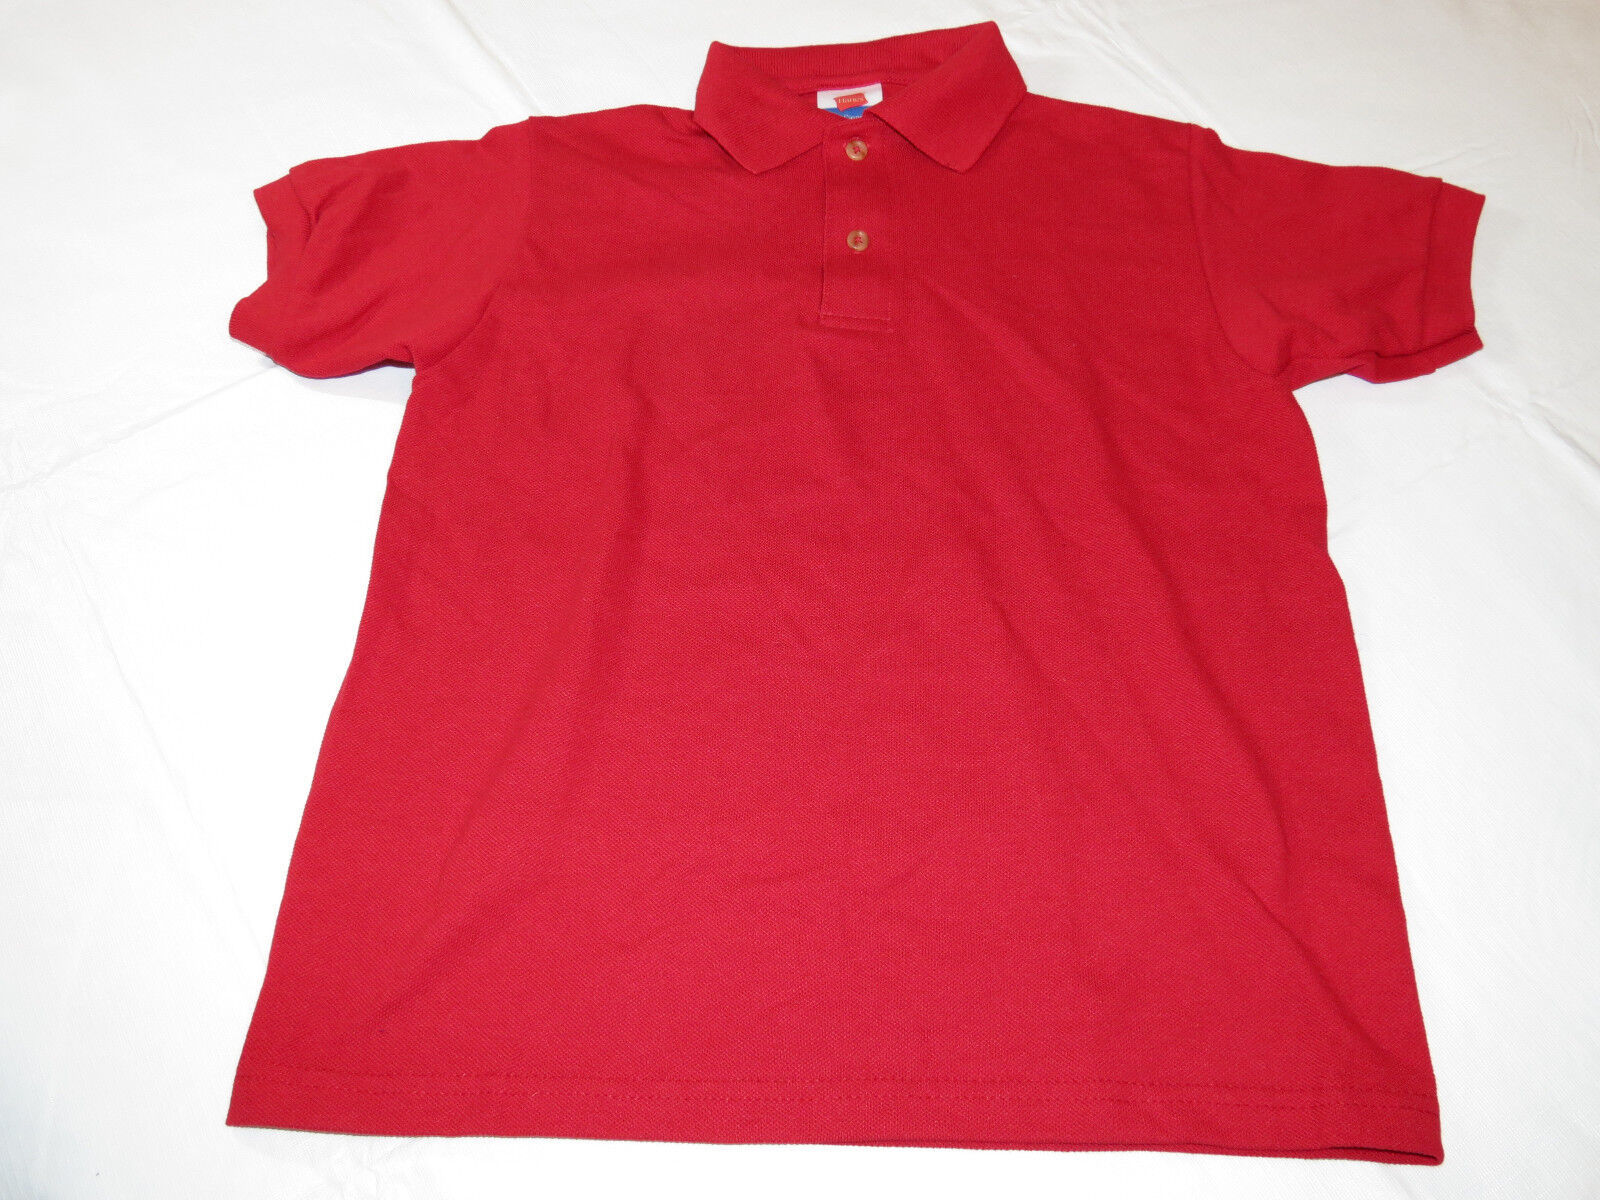 Youth Kids Hanes Stay Clean Polo shirt short sleeve red M 10-12 school - $12.86